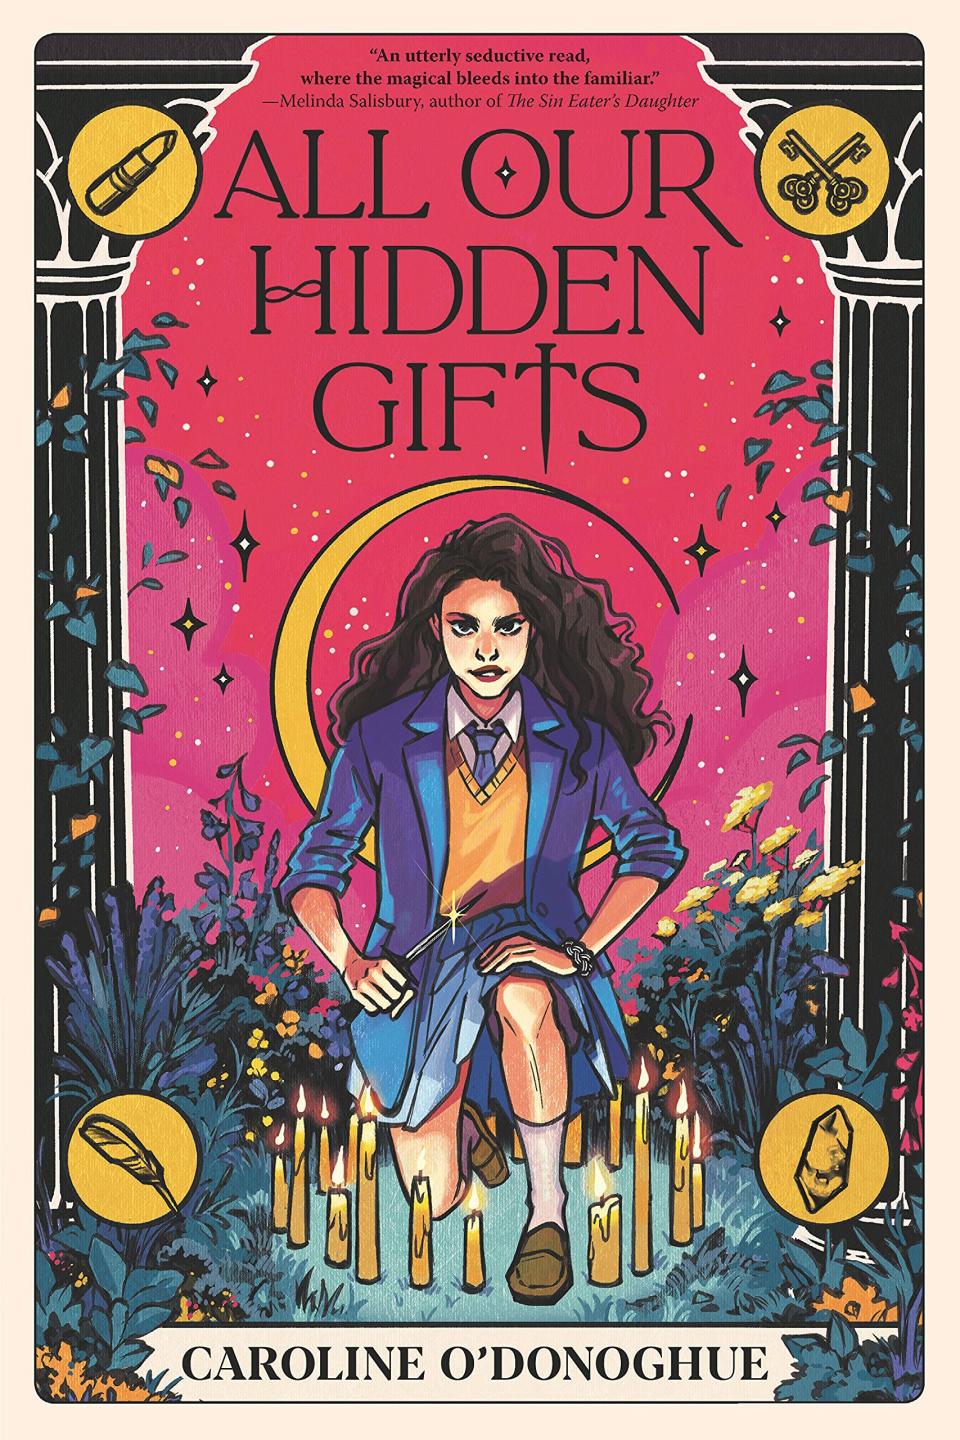 "All Our Hidden Gifts"